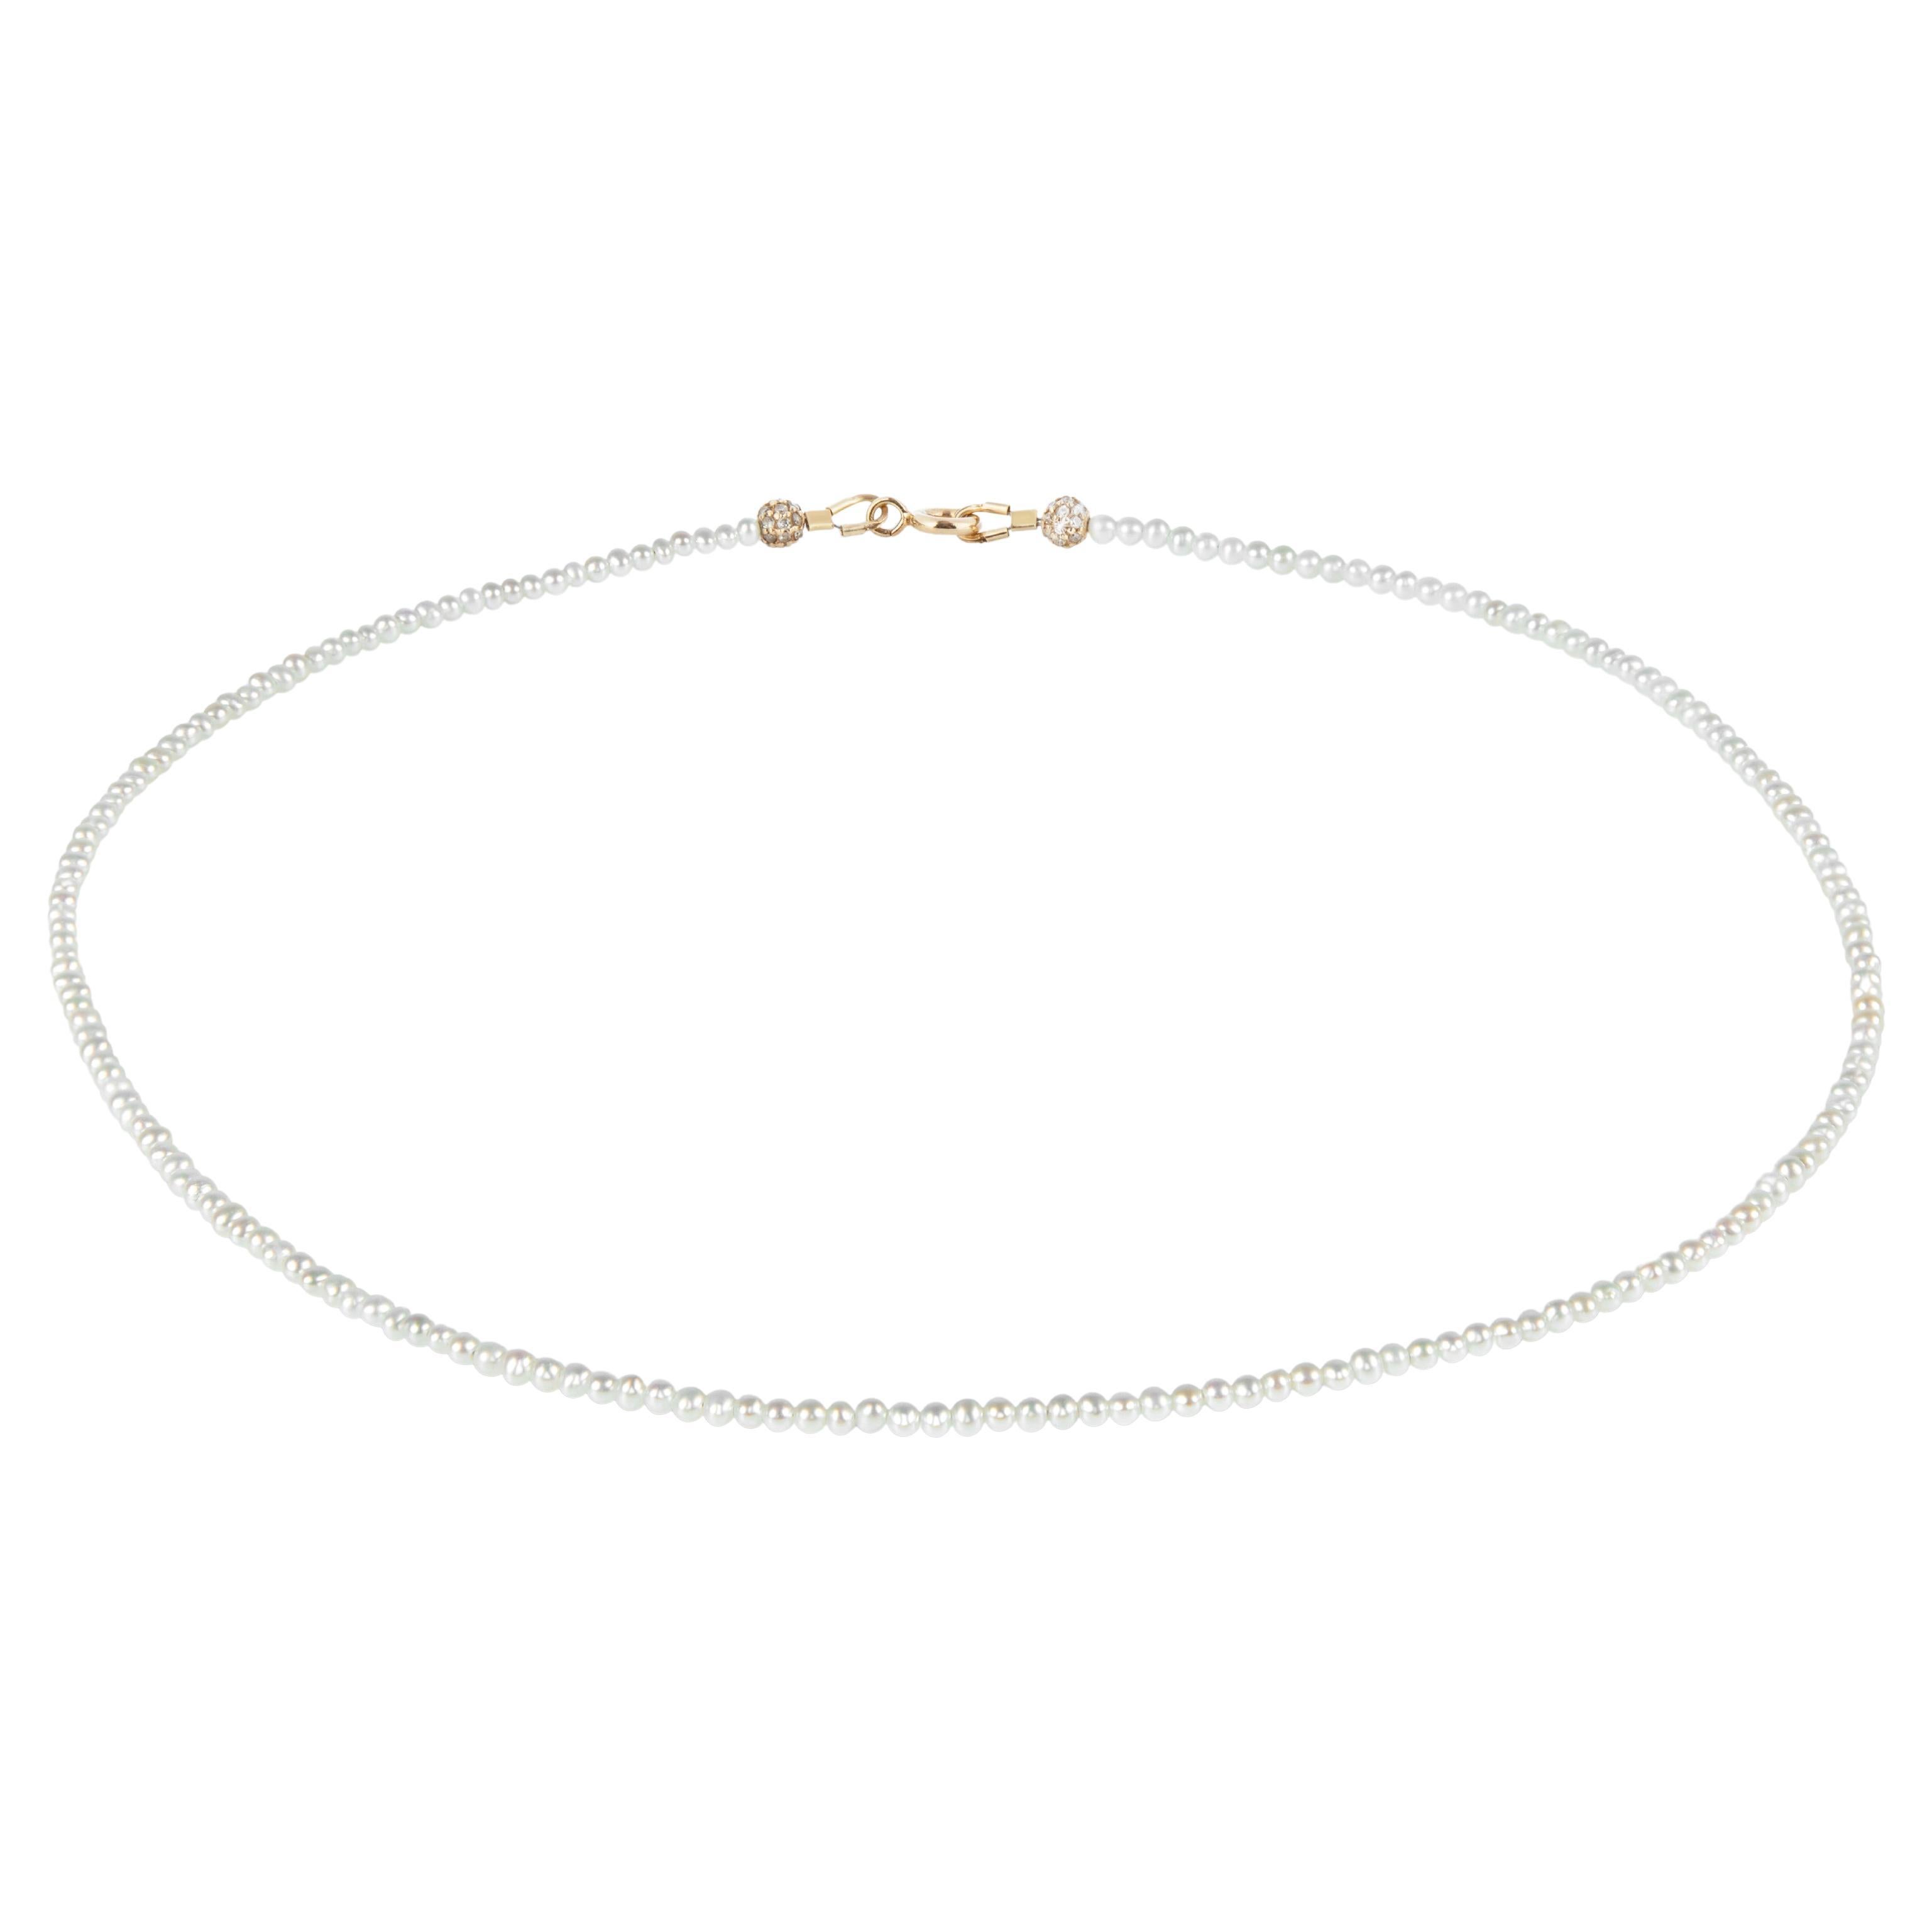 Delicate white freshwater pearl necklace with 14k gold closure For Sale